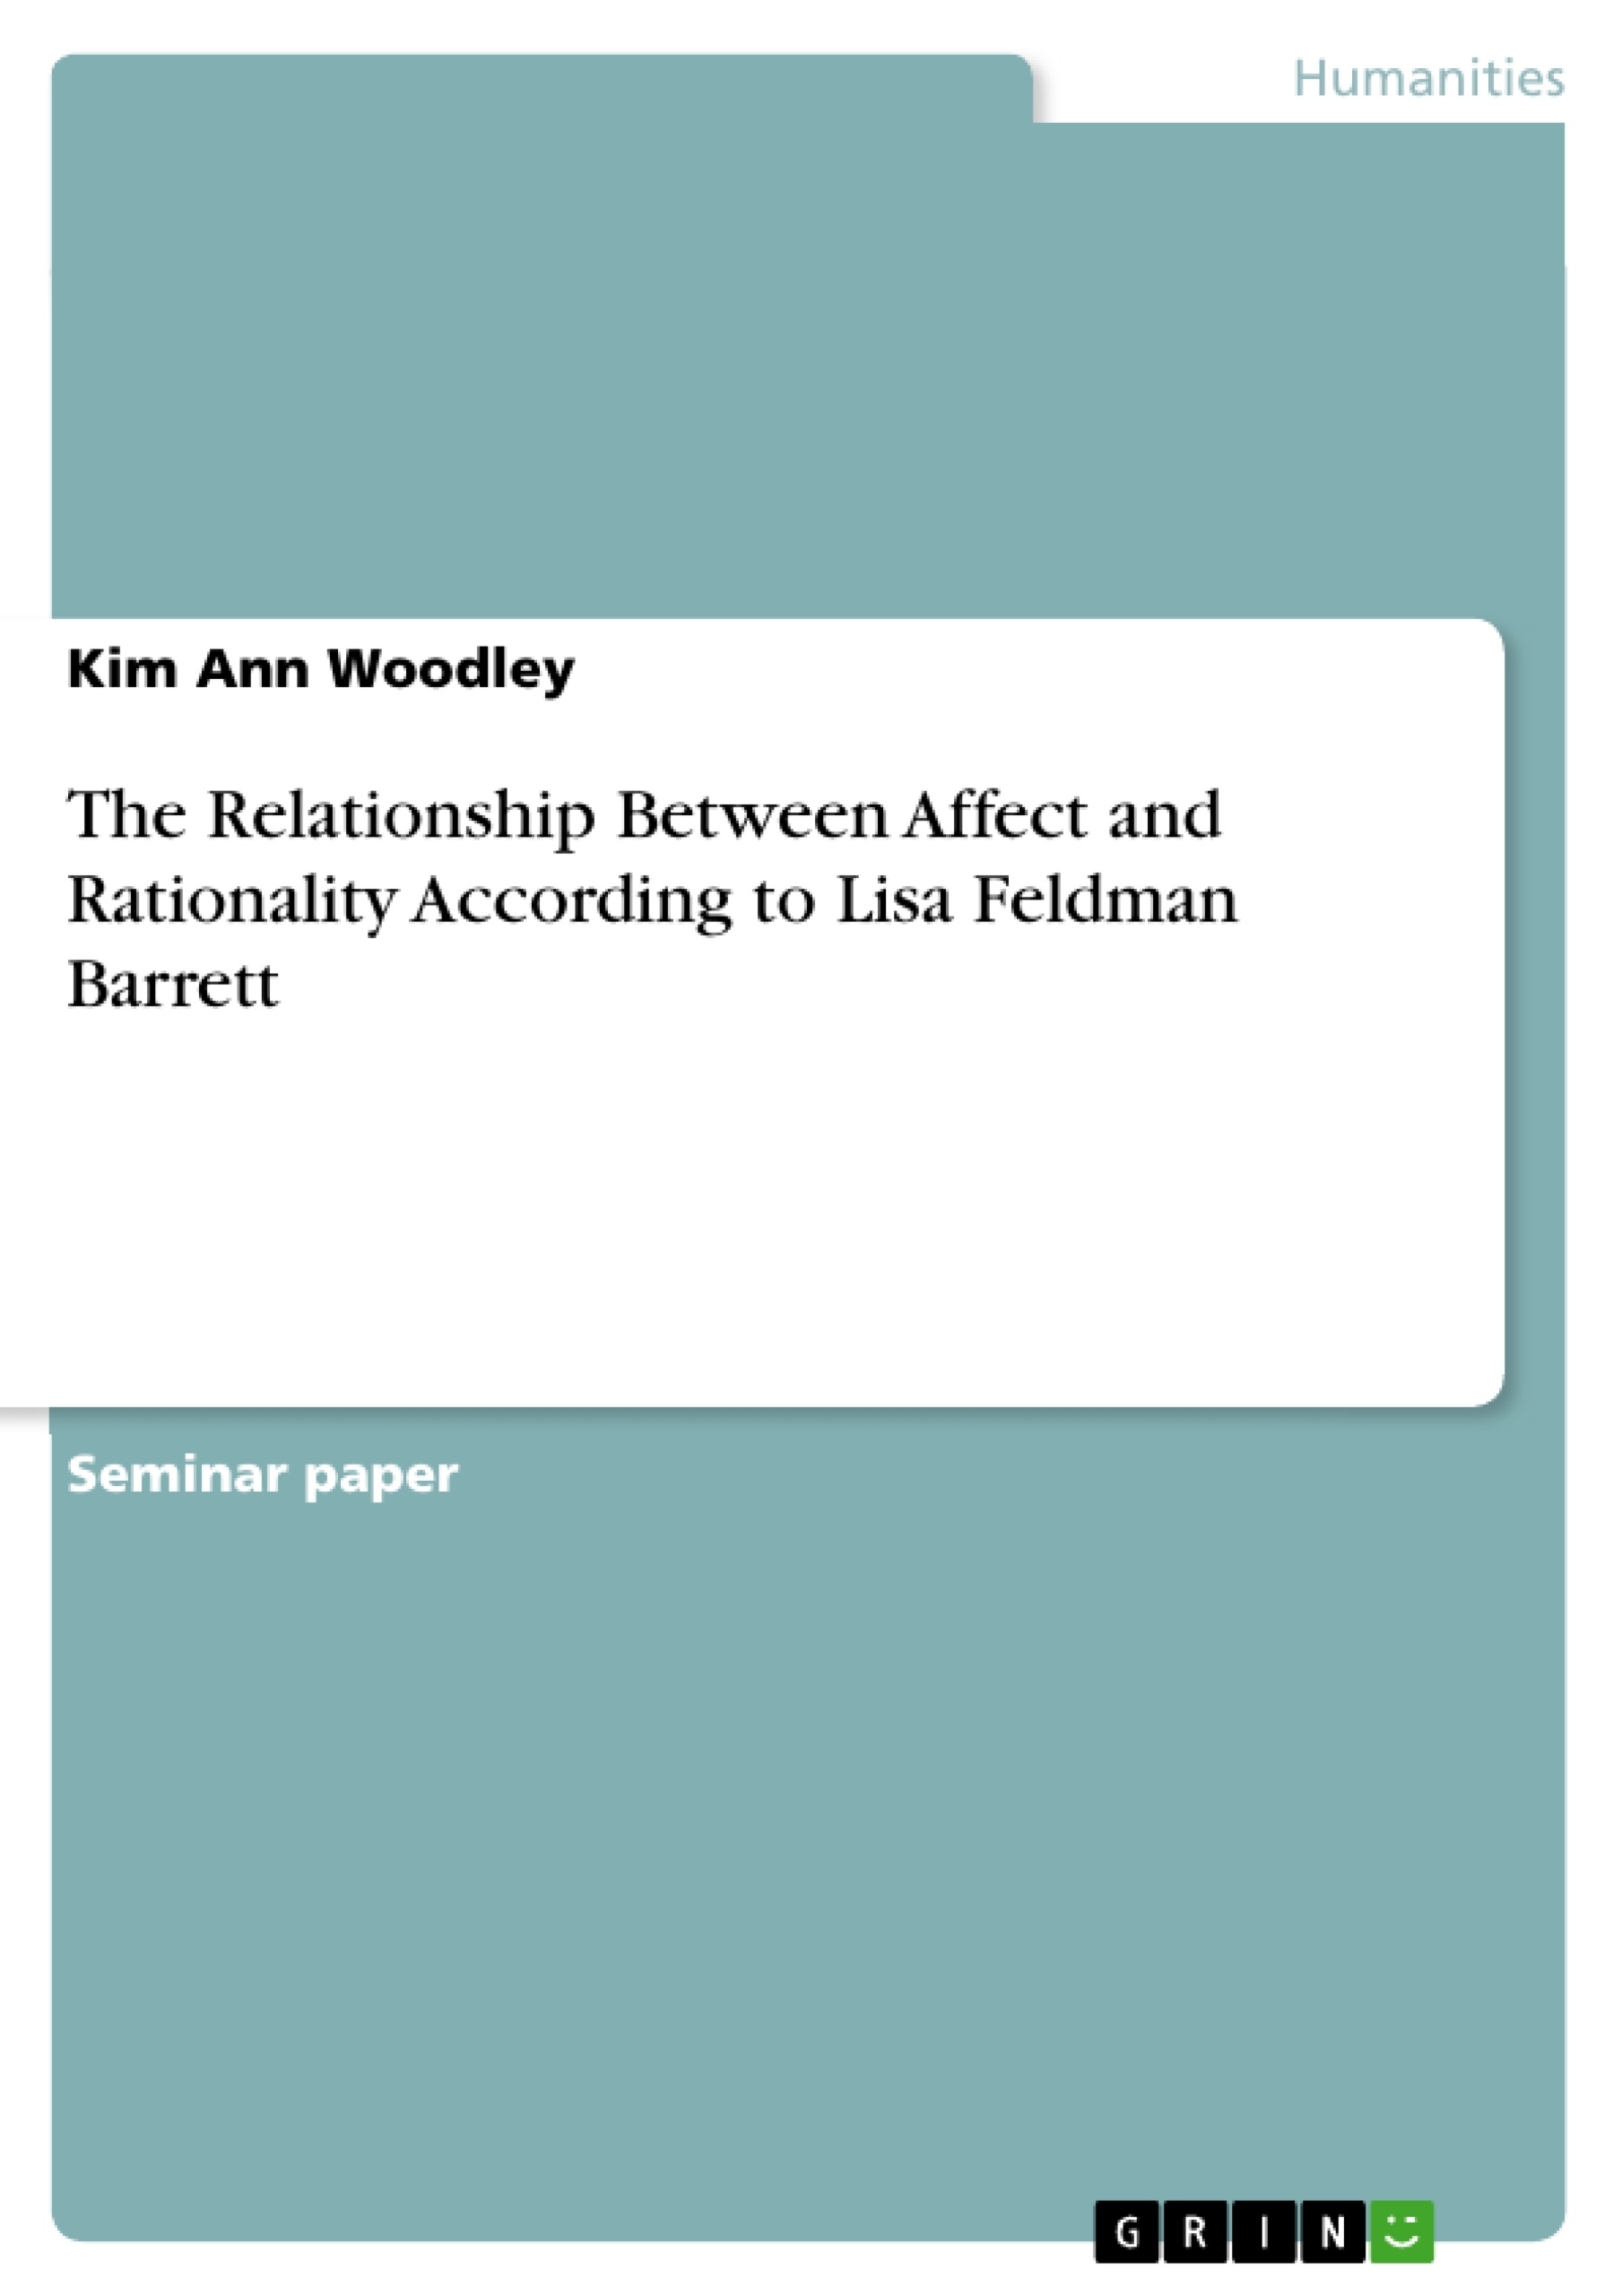 Título: The Relationship Between Affect and Rationality According to Lisa Feldman Barrett